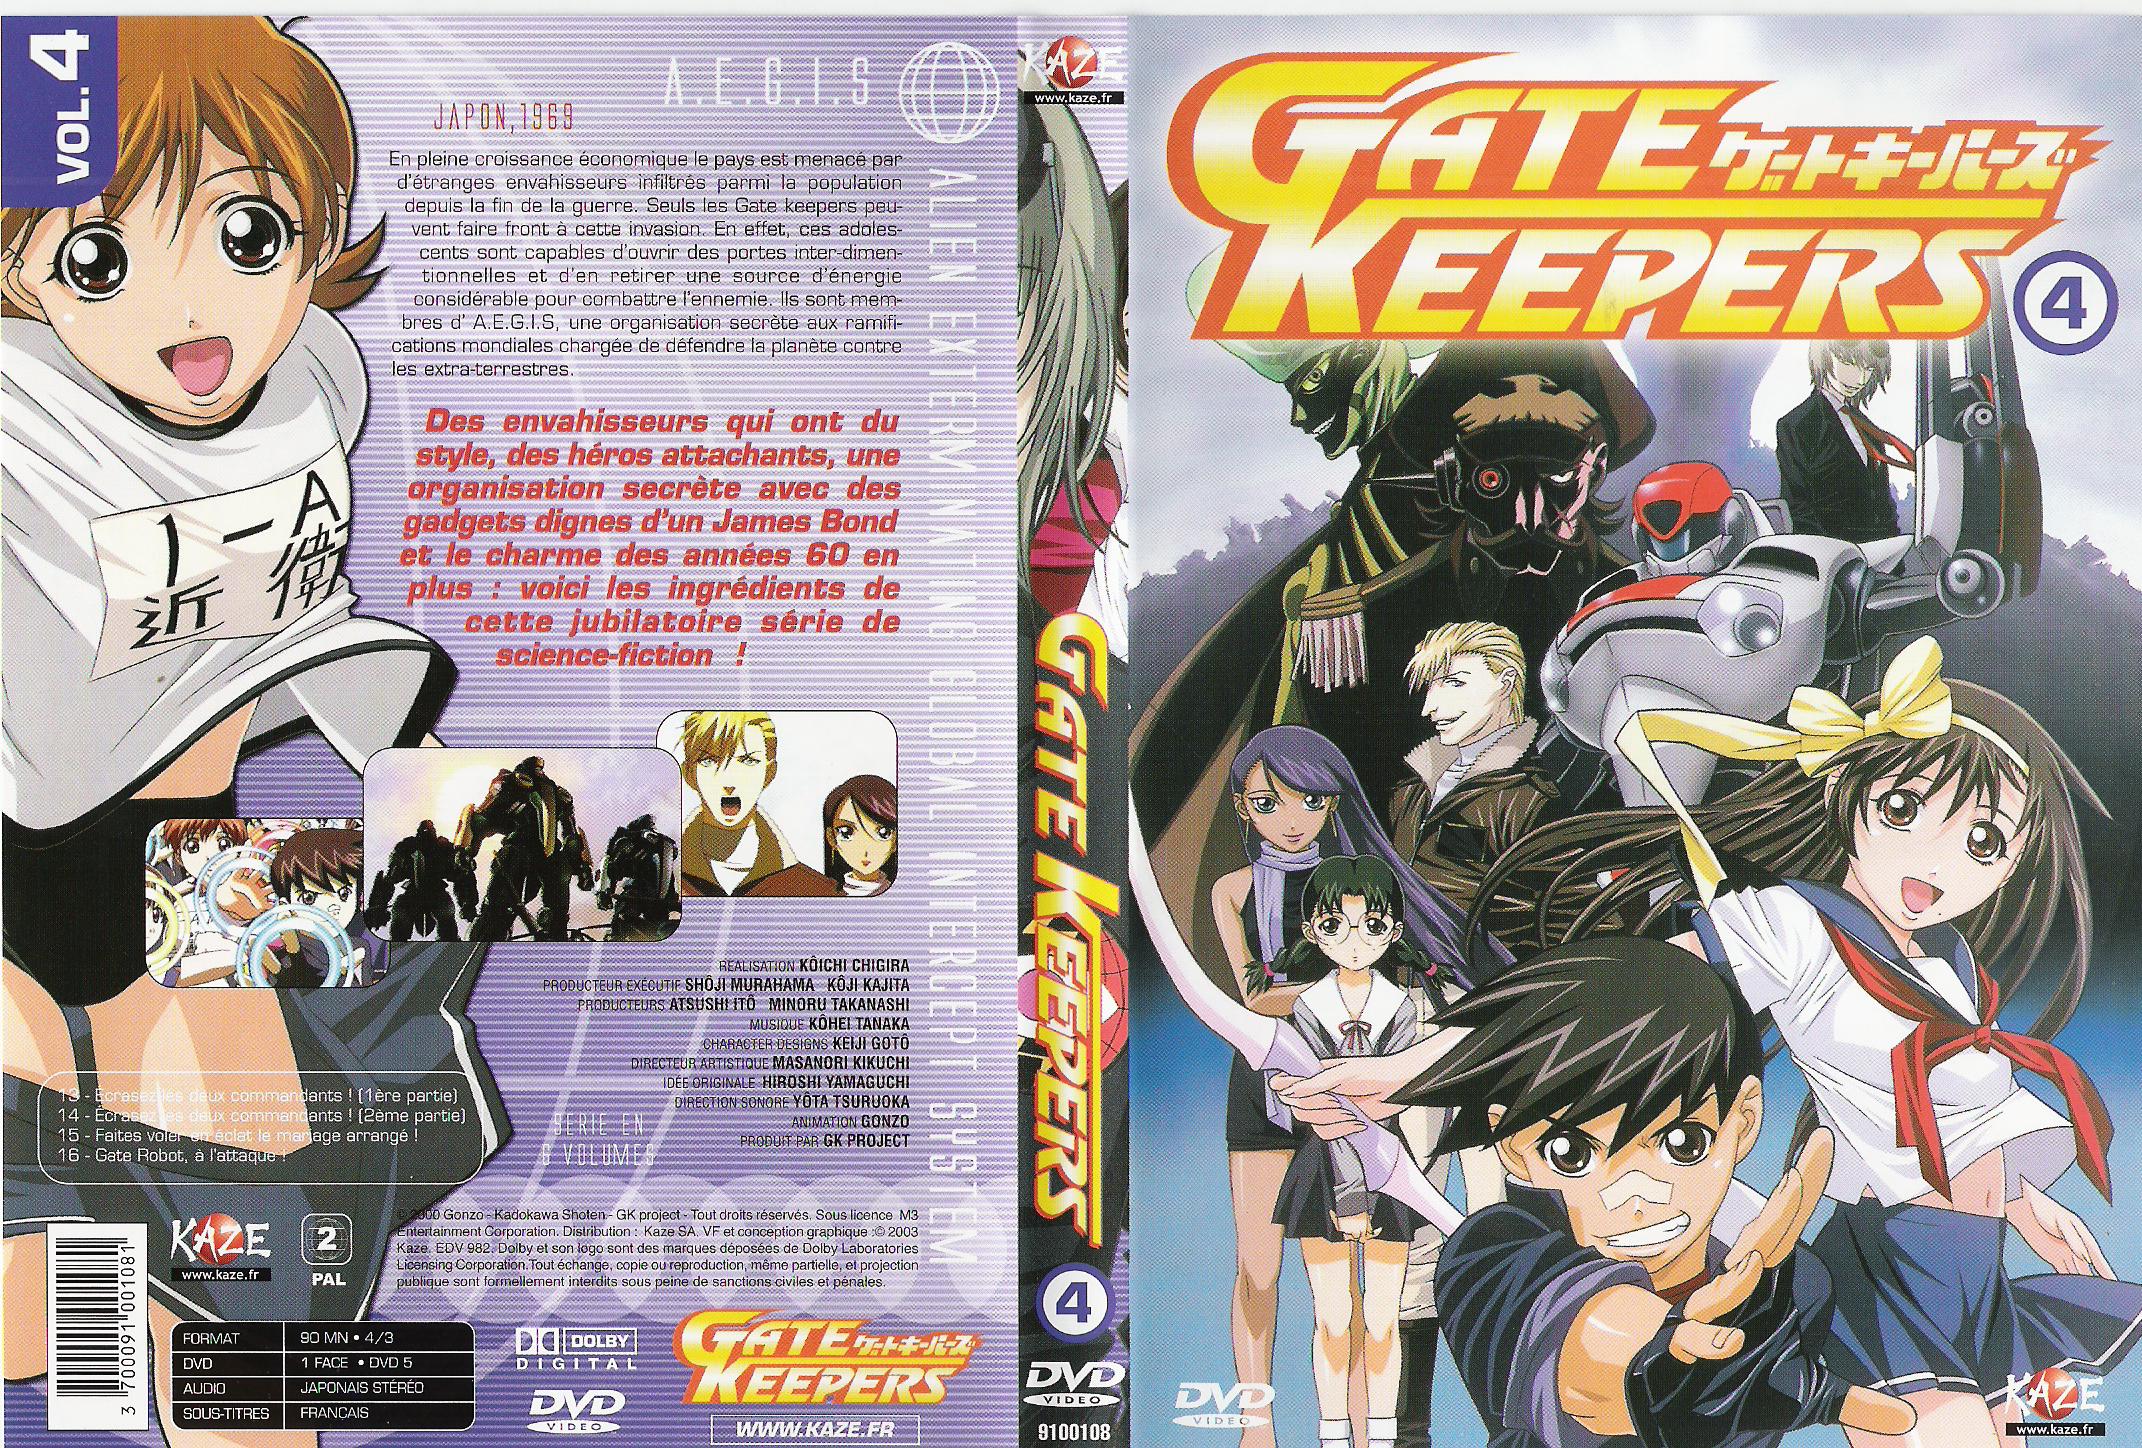 Jaquette DVD Gate Keepers DVD 4